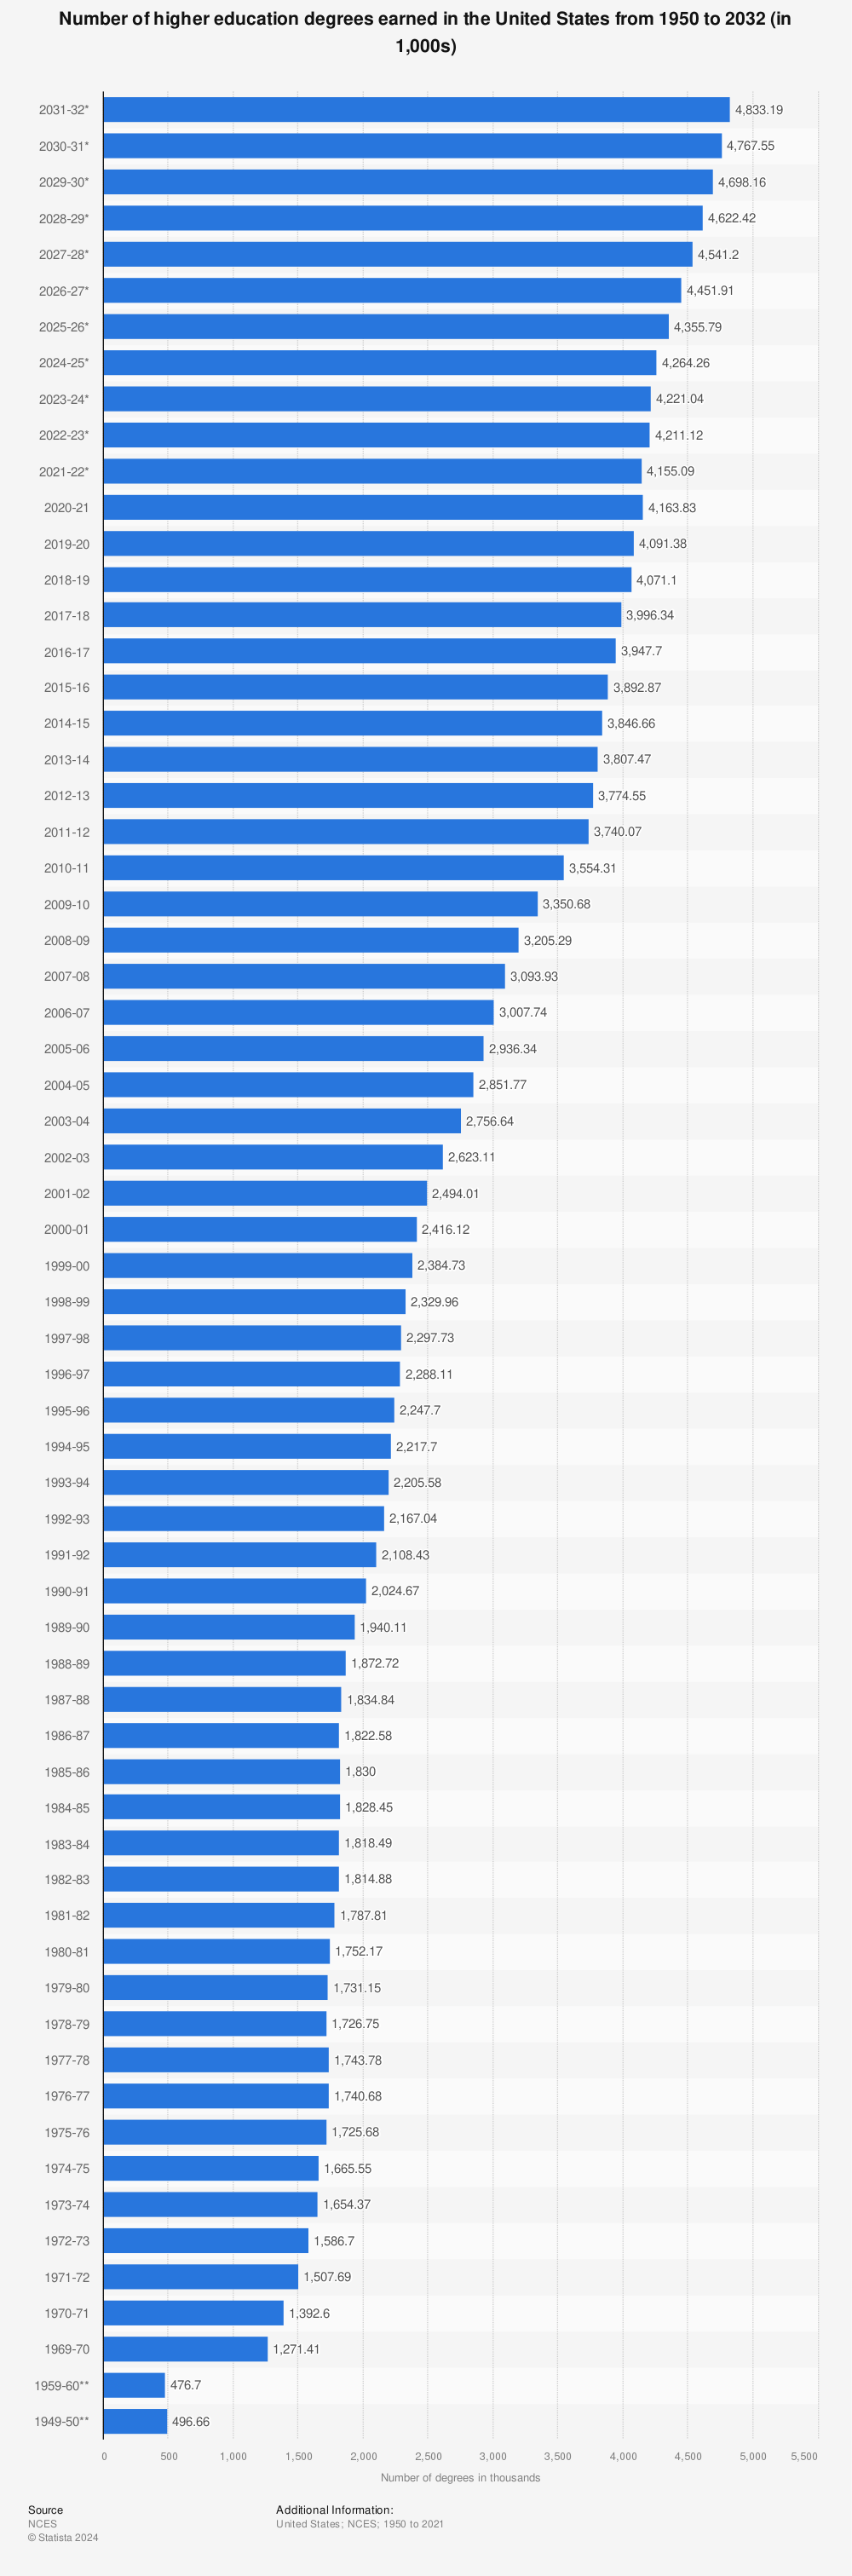 Statistic: Number of higher education degrees earned in the United States from 1950 to 2031 (in 1,000s) | Statista